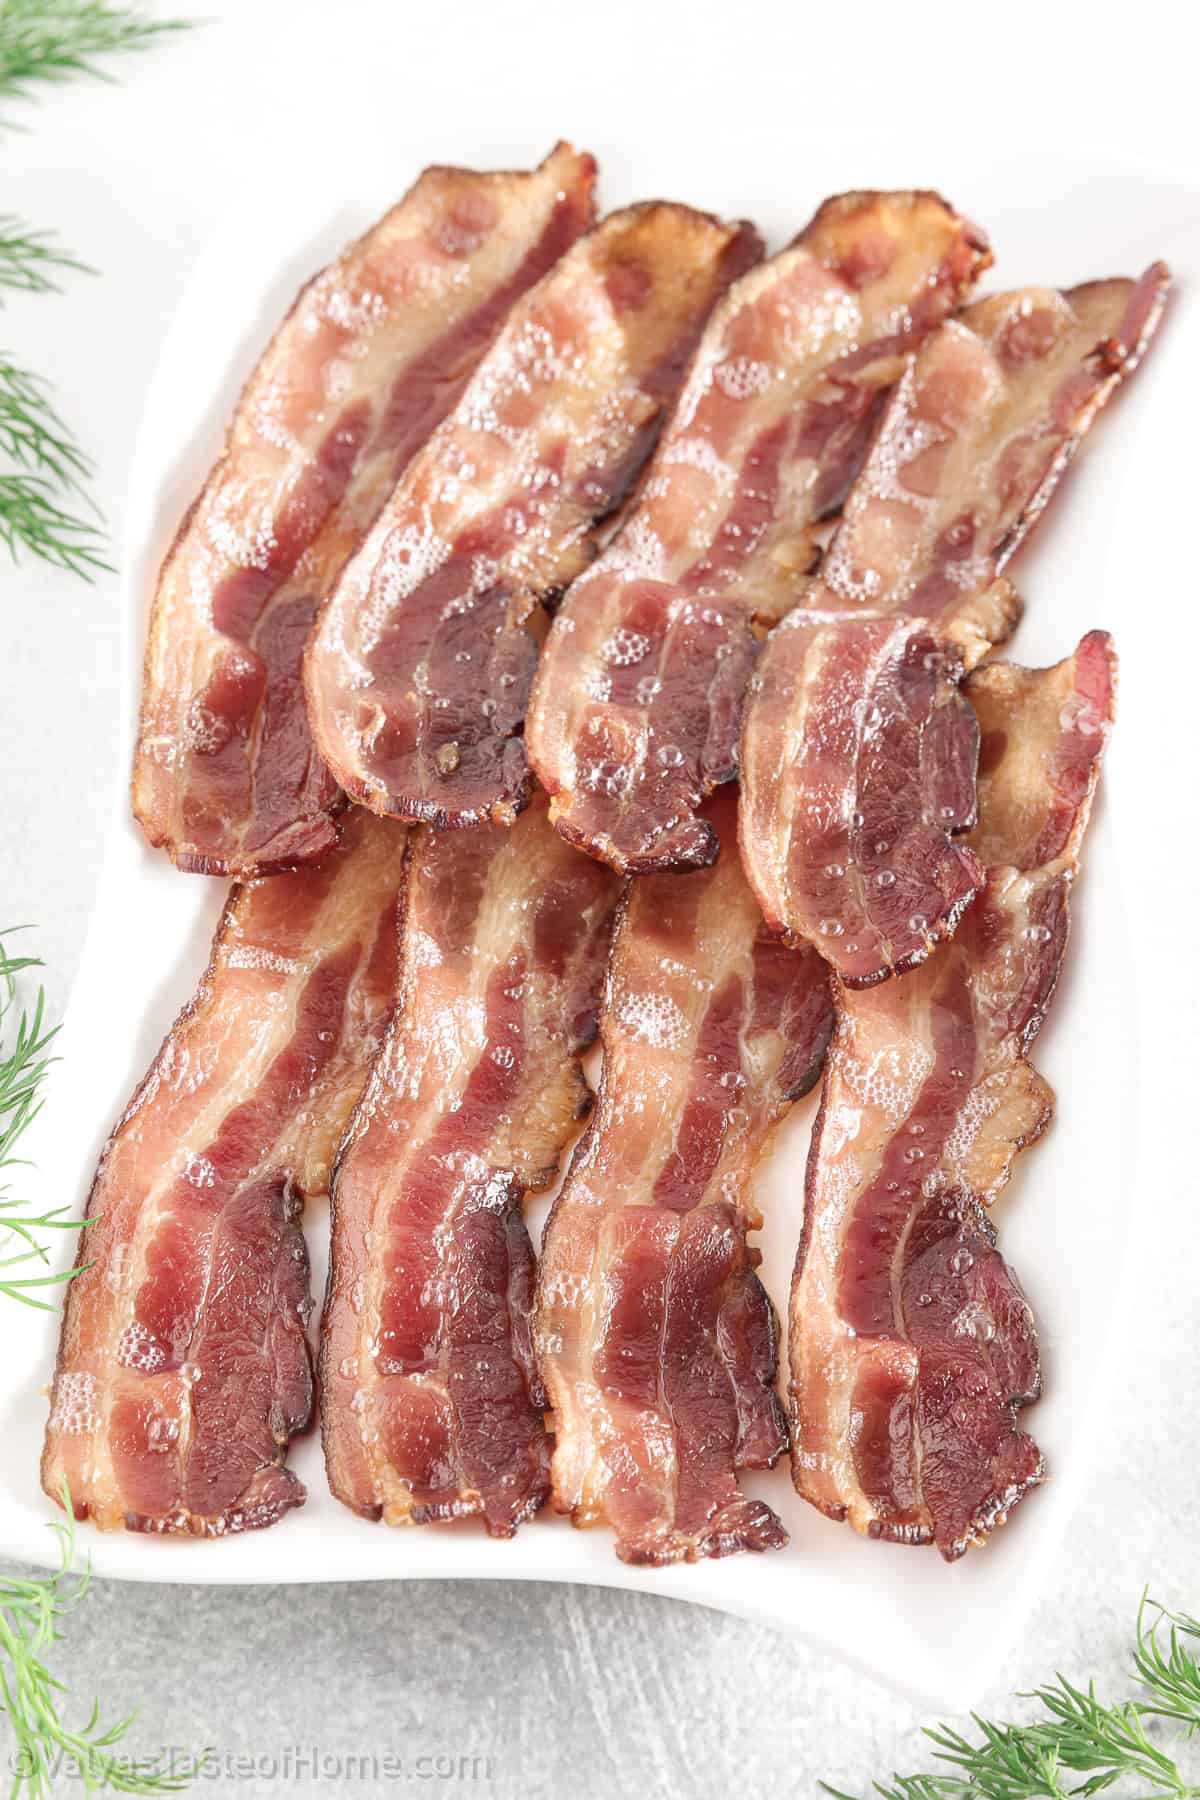 https://www.valyastasteofhome.com/wp-content/uploads/2019/11/How-to-Make-Perfect-Quick-and-Easy-Oven-Broiled-Bacon-1.jpg